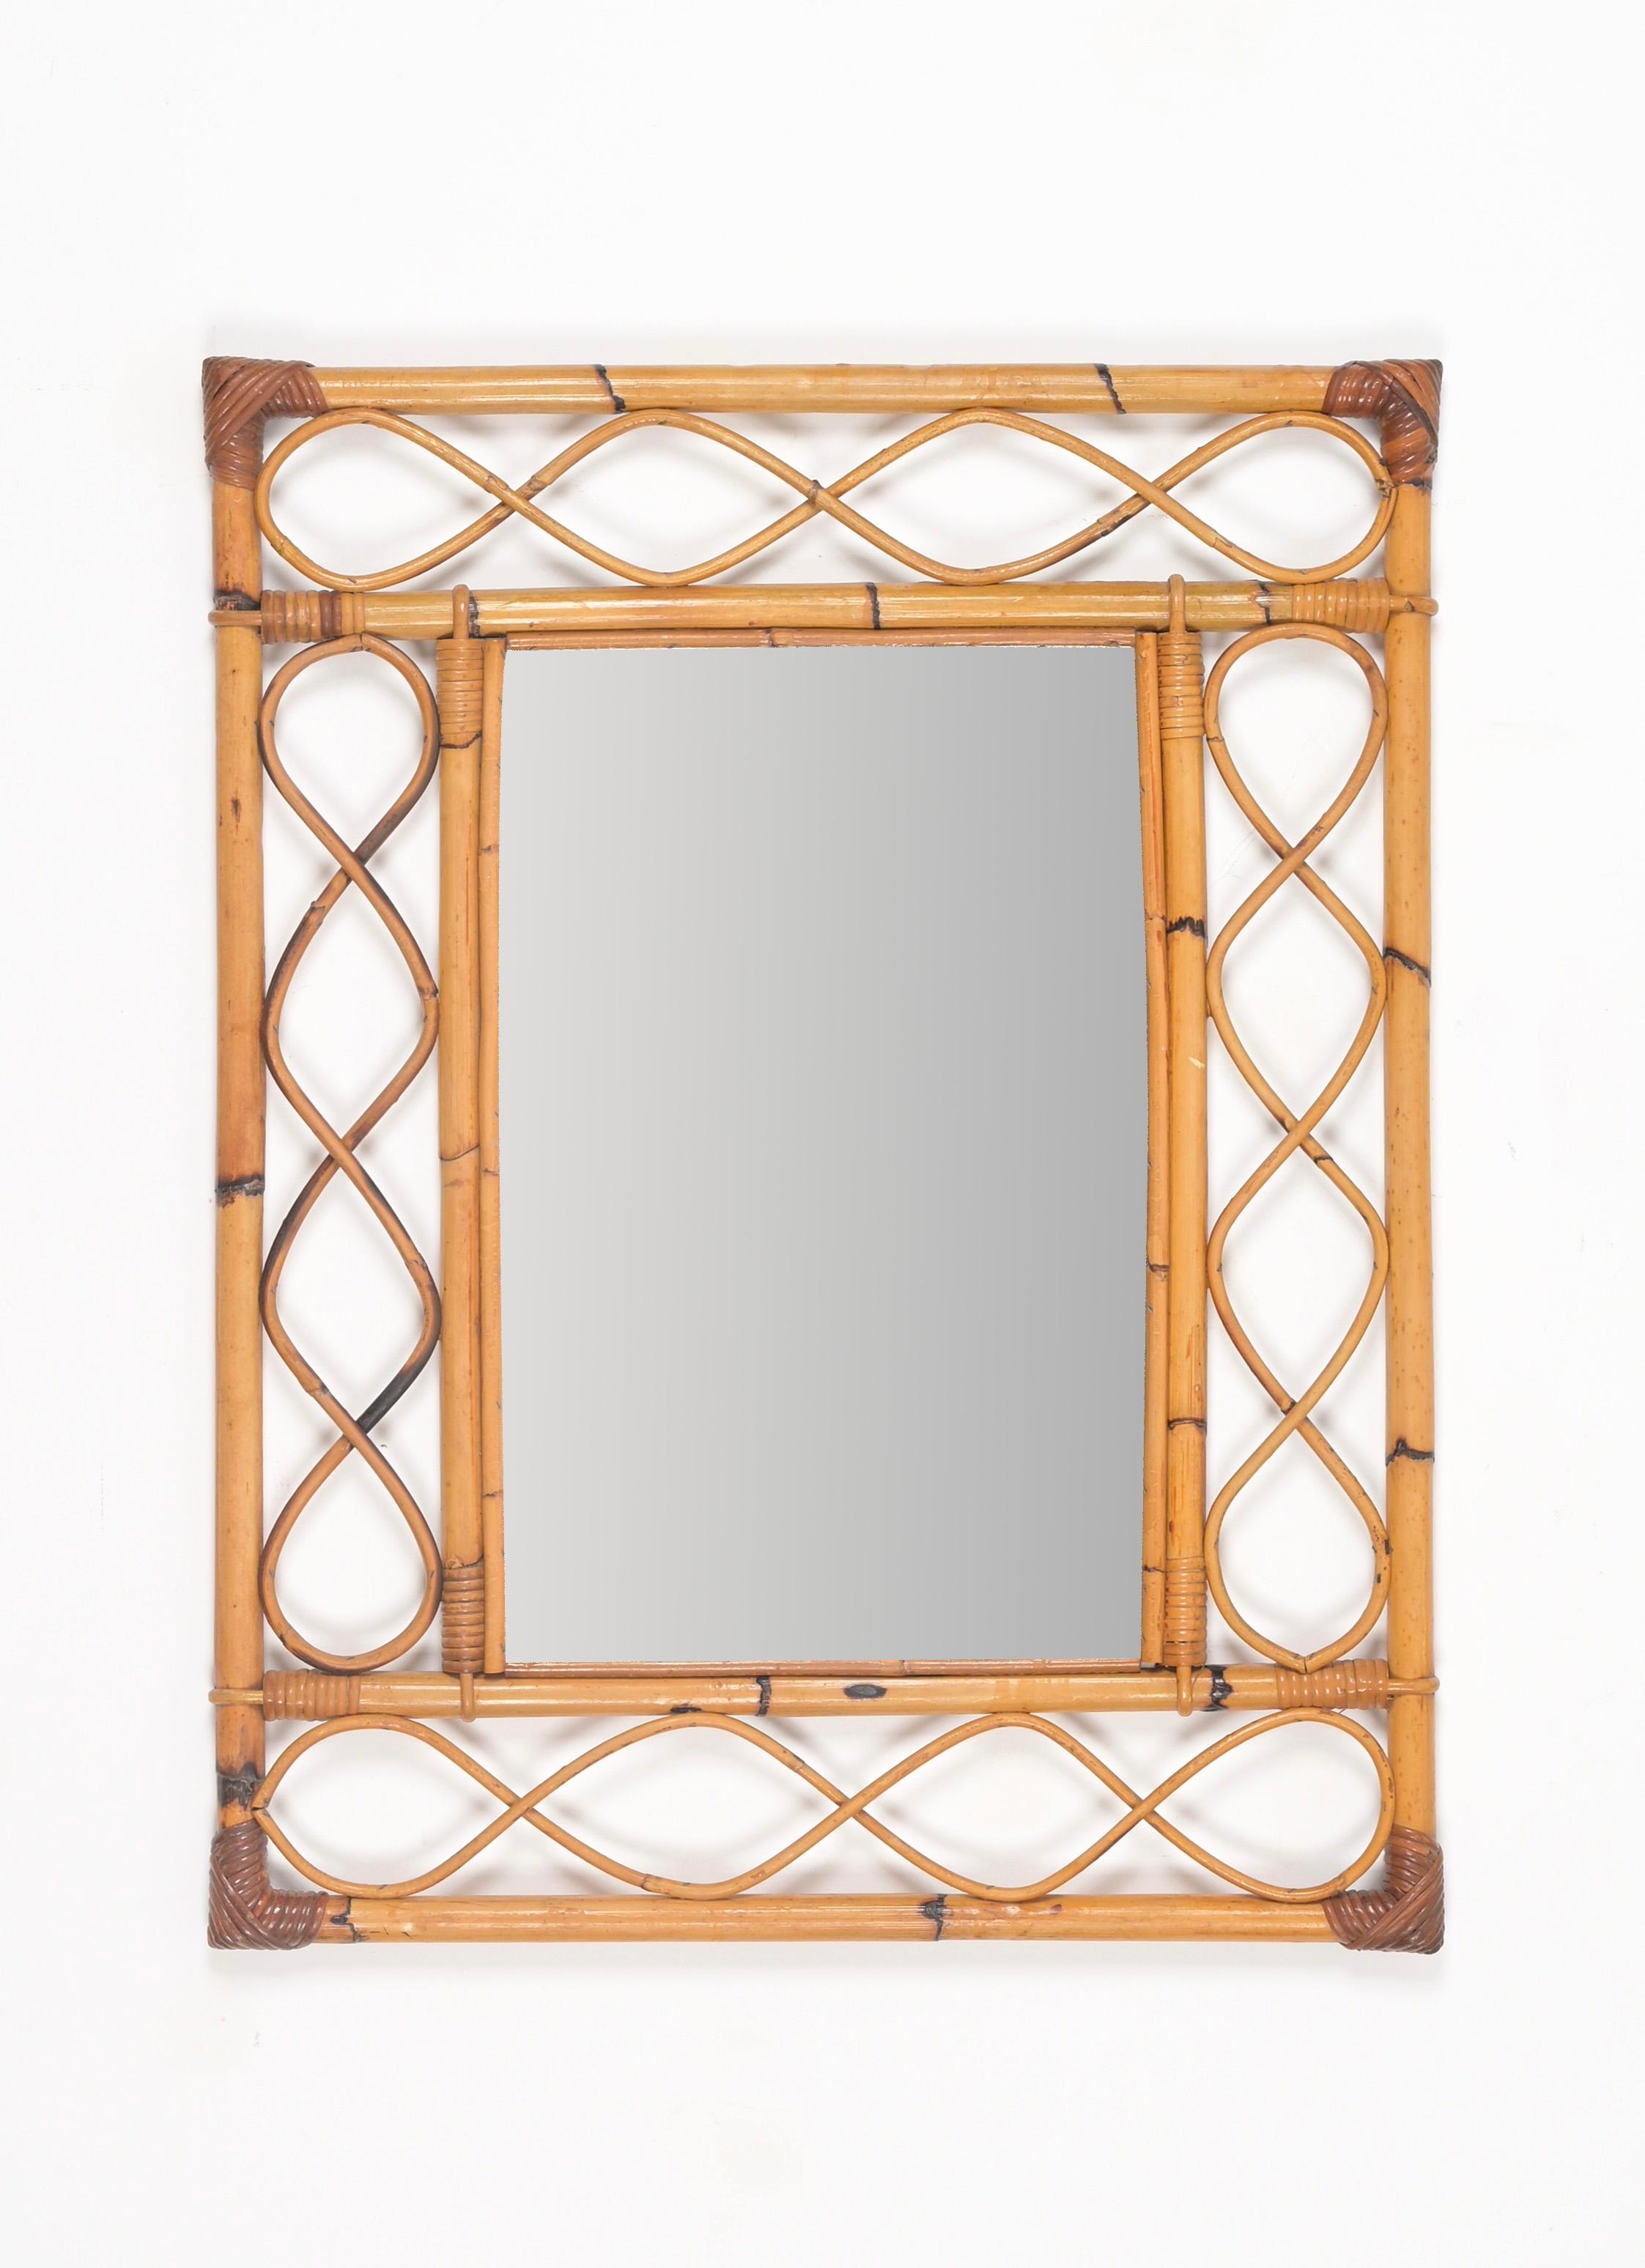 Beautiful Côte d'Azur style rectangular wall mirror in bamboo, curved rattan and hand-woven wicker. This spectacular large mirror was produced in Italy during the 1960s.

This delightful mirror features a double rectangular frame in bamboo enriched